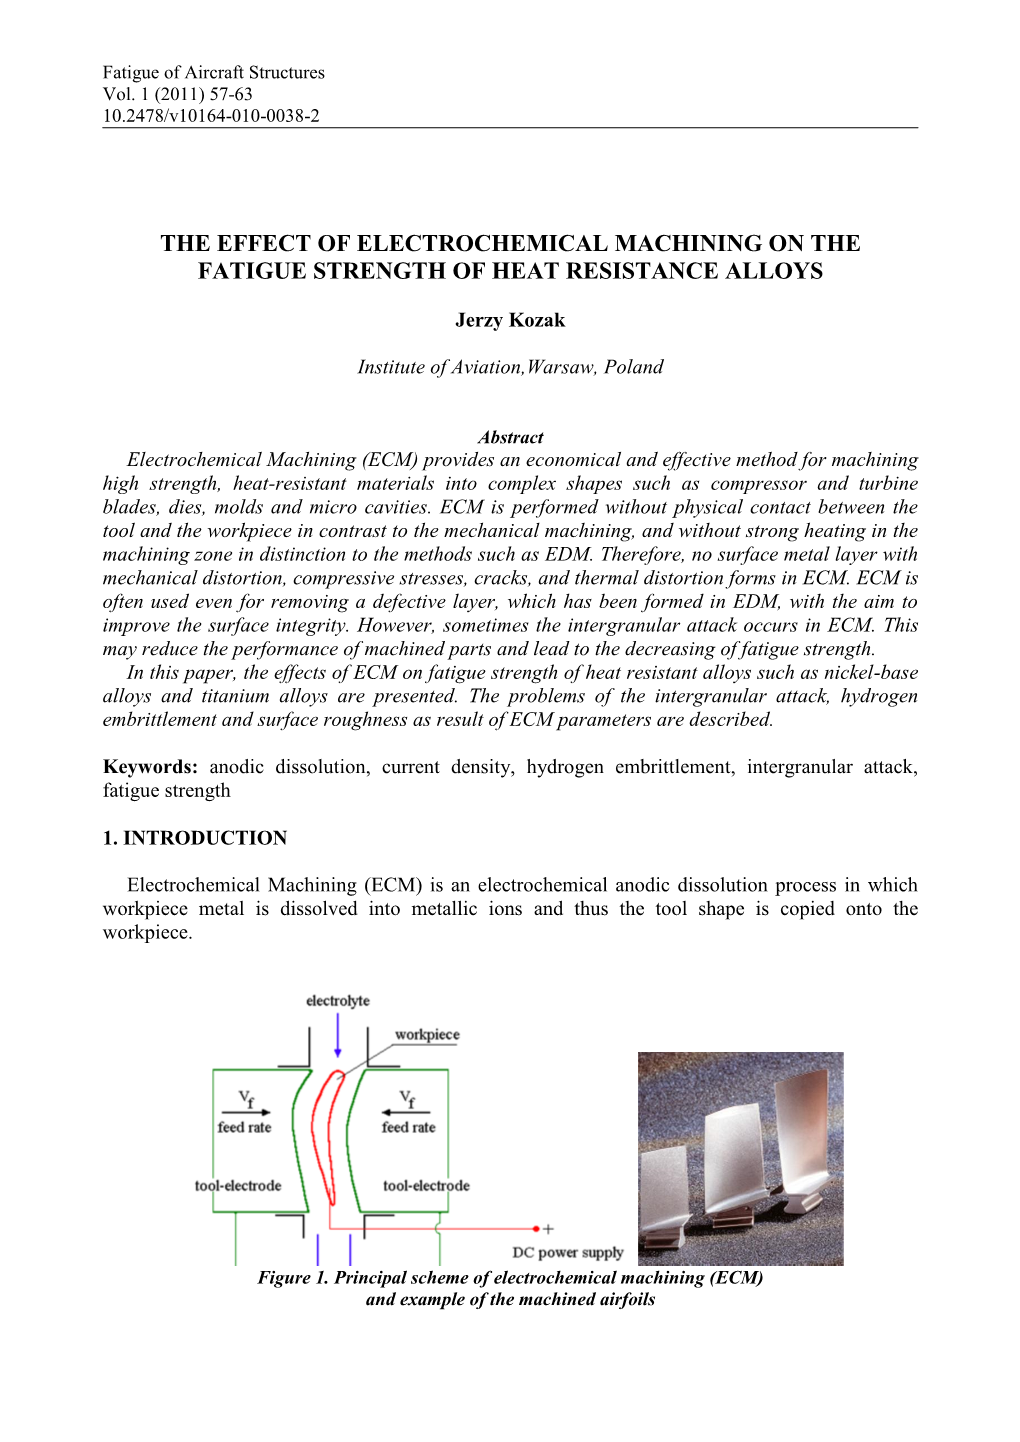 The Effect of Electrochemical Machining on the Fatigue Strength of Heat Resistance Alloys